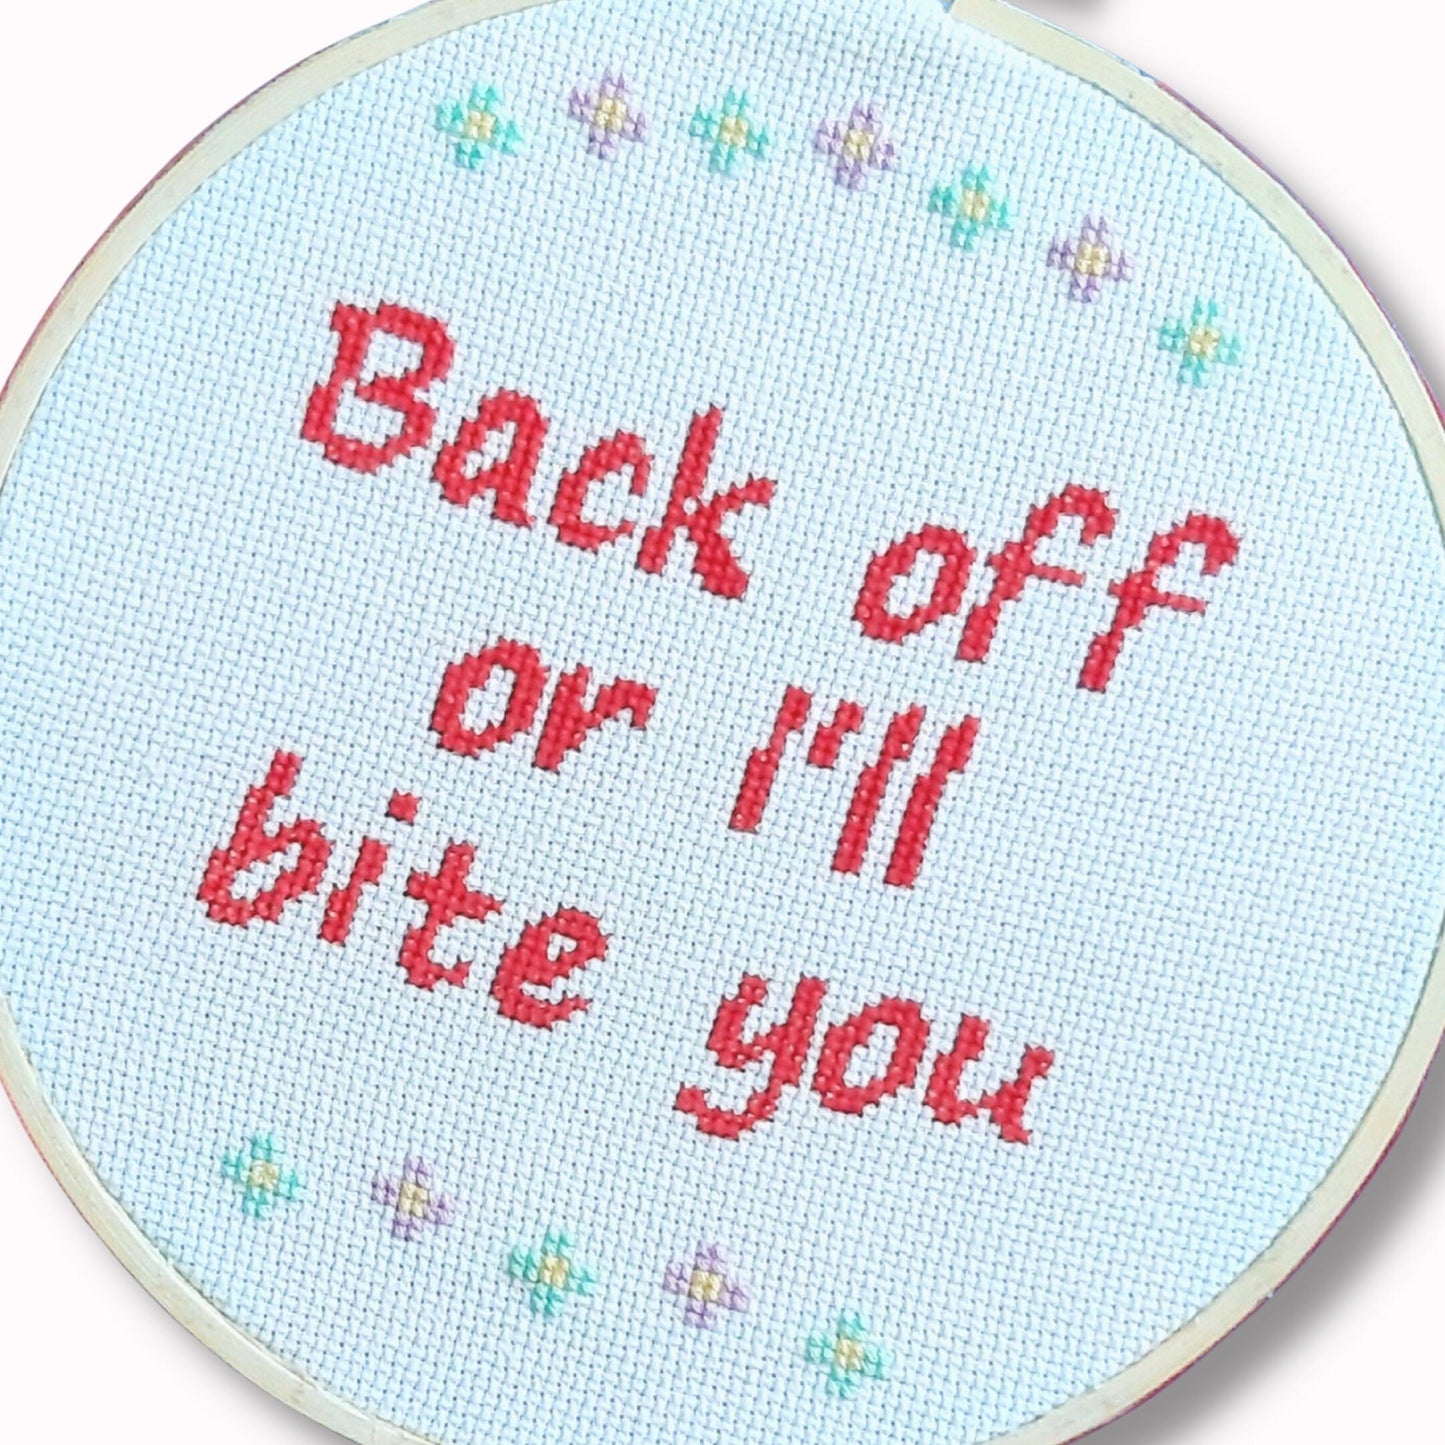 Back off or I'll bite you, completed cross stitch quote - Thistleflat Crafts